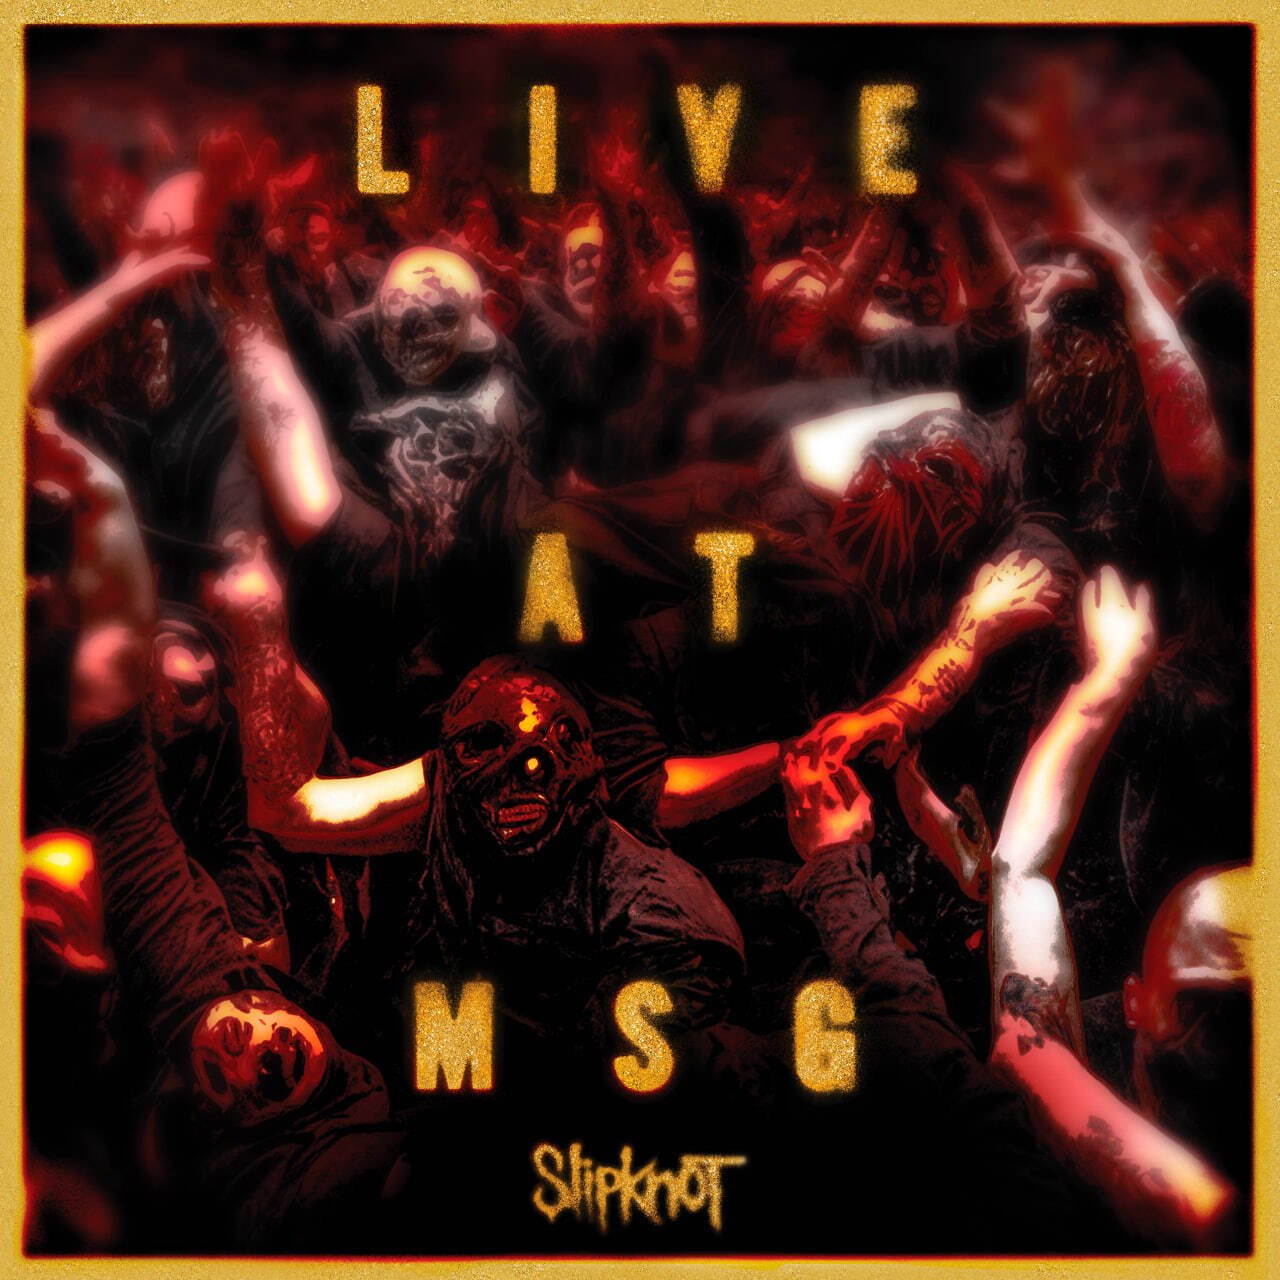 Металл Warner Music Slipknot - Live At MSG (Black Vinyl 2LP) металл warner music accept blood of the nations limited edition gold vinyl 2lp